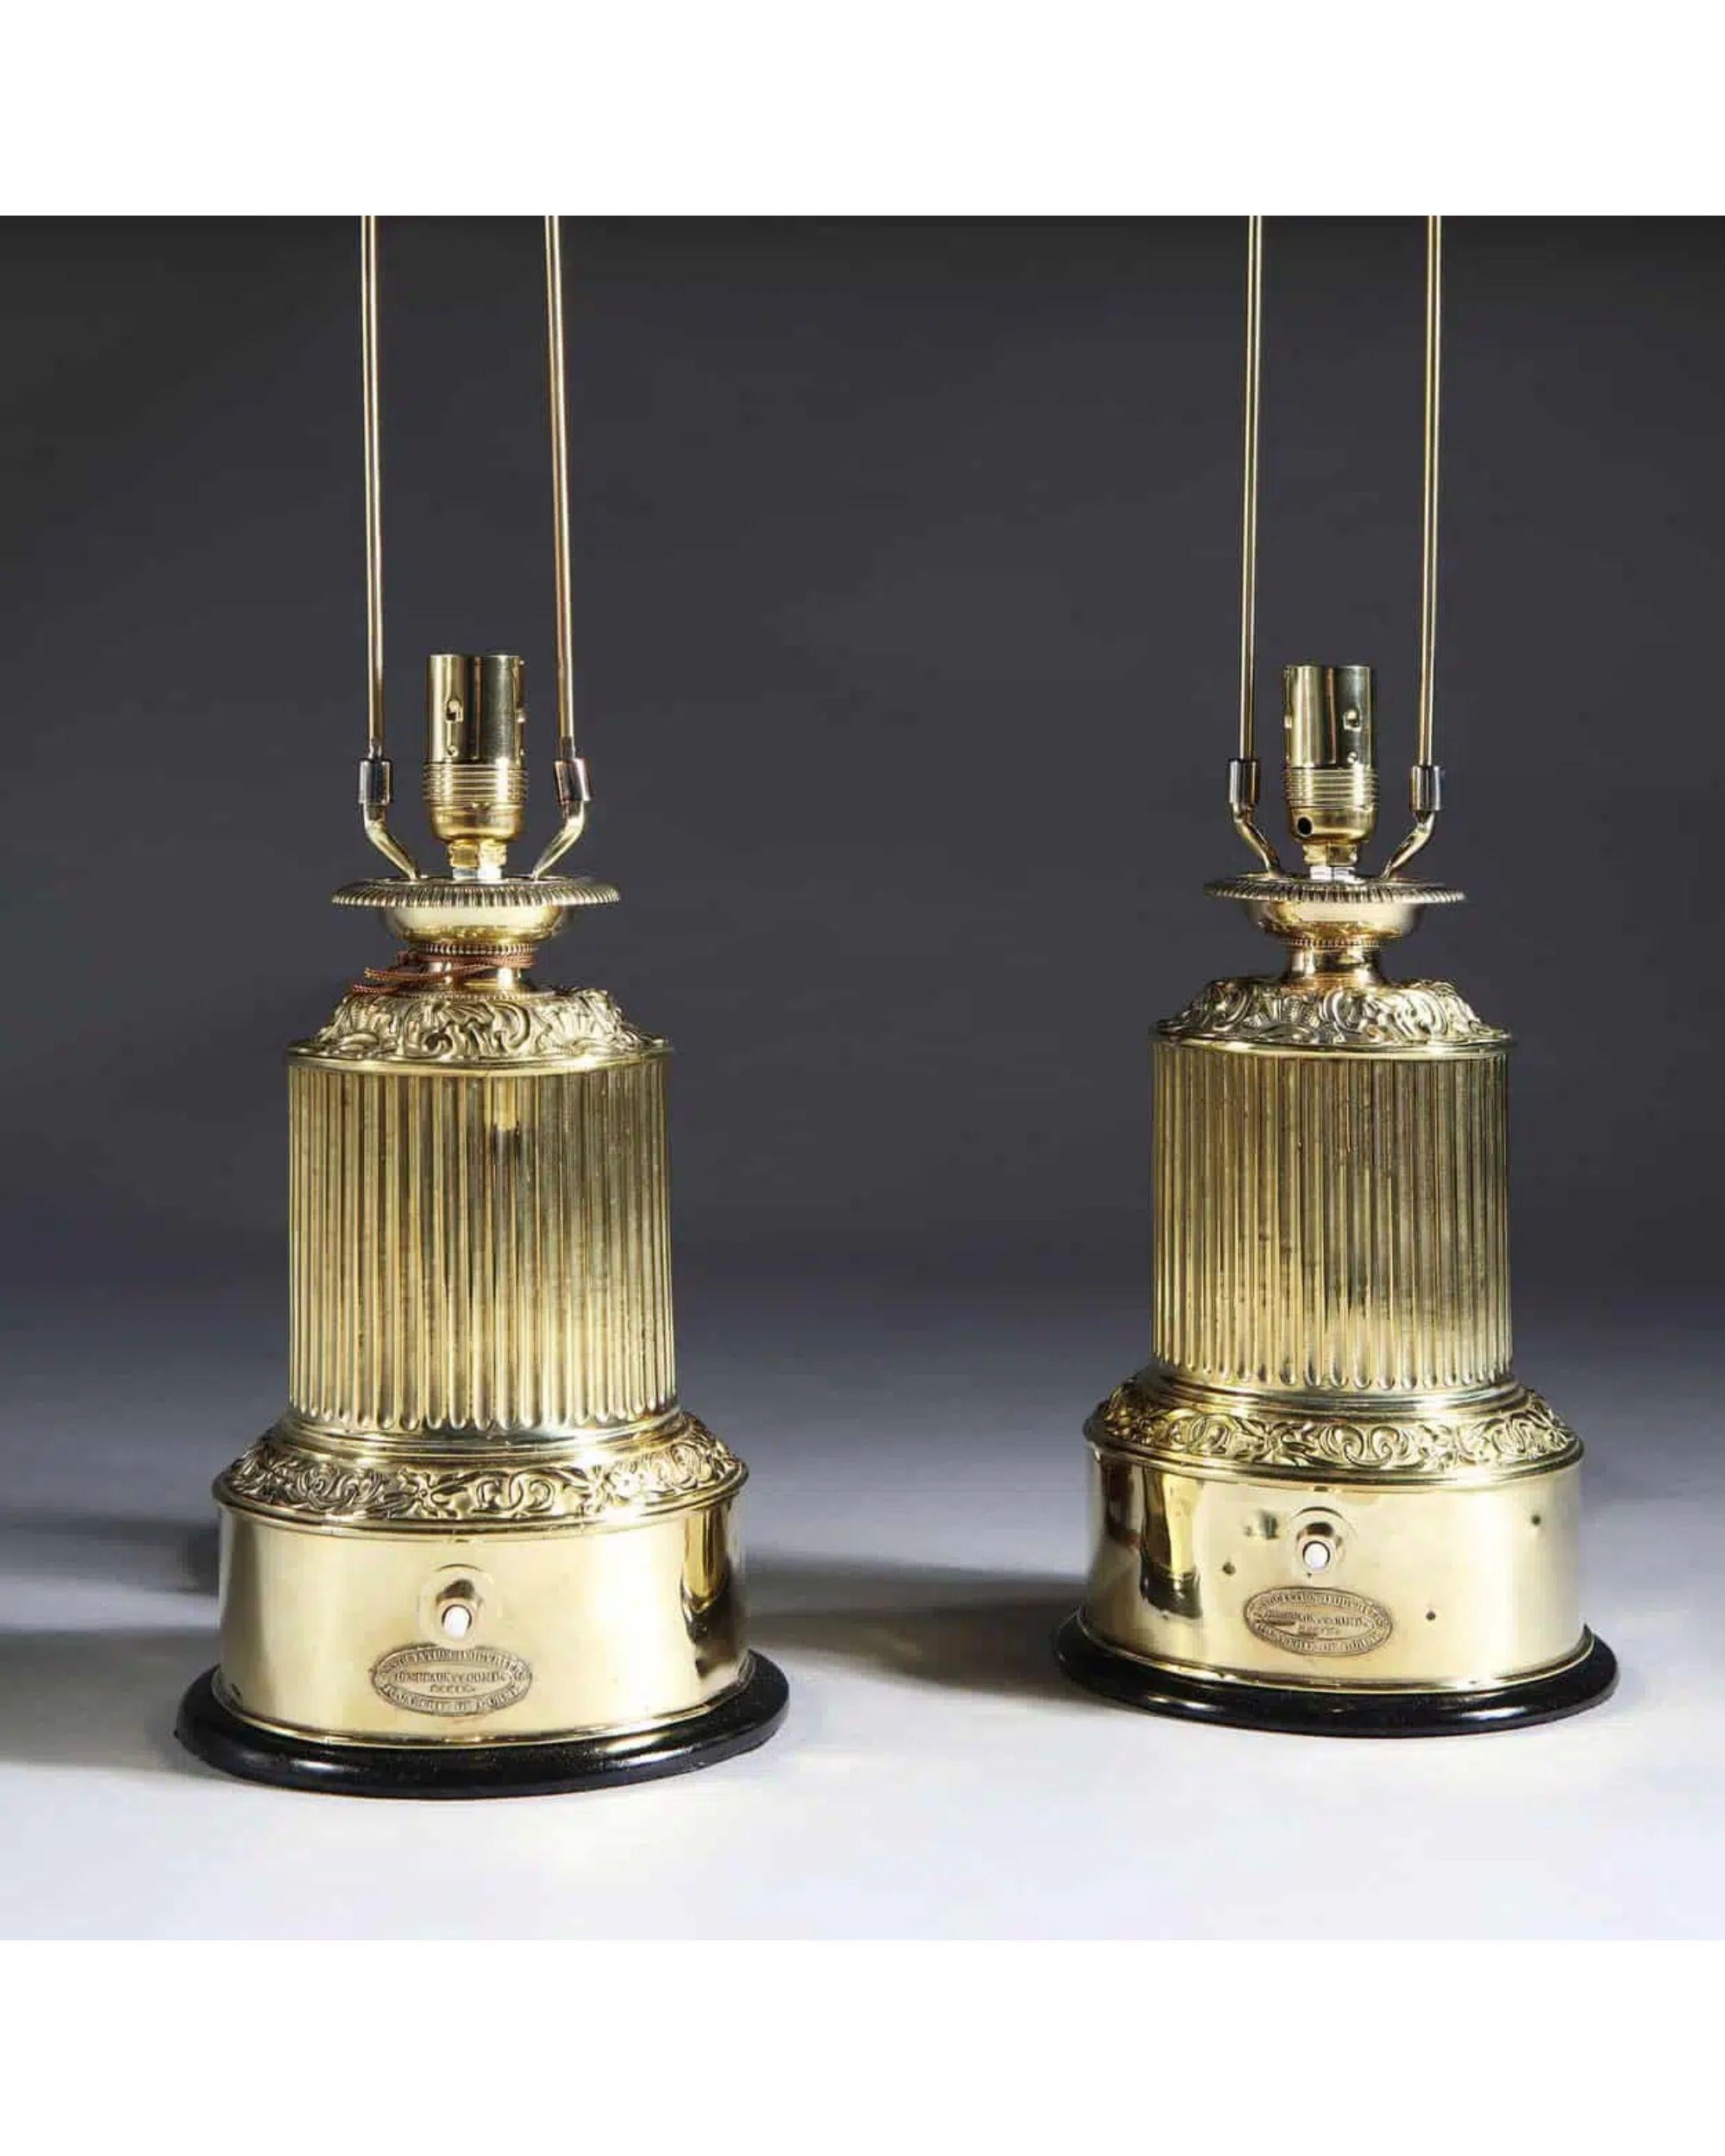 A rare pair of Charles X repoussé brass Colza table lamps

Now mounted for electricity with bespoke card shades and brass finials. With the makers mark Desbeaux & Co.

Additional information: 
Origin: France
Period: Circa 1820, 19th Century
Style: